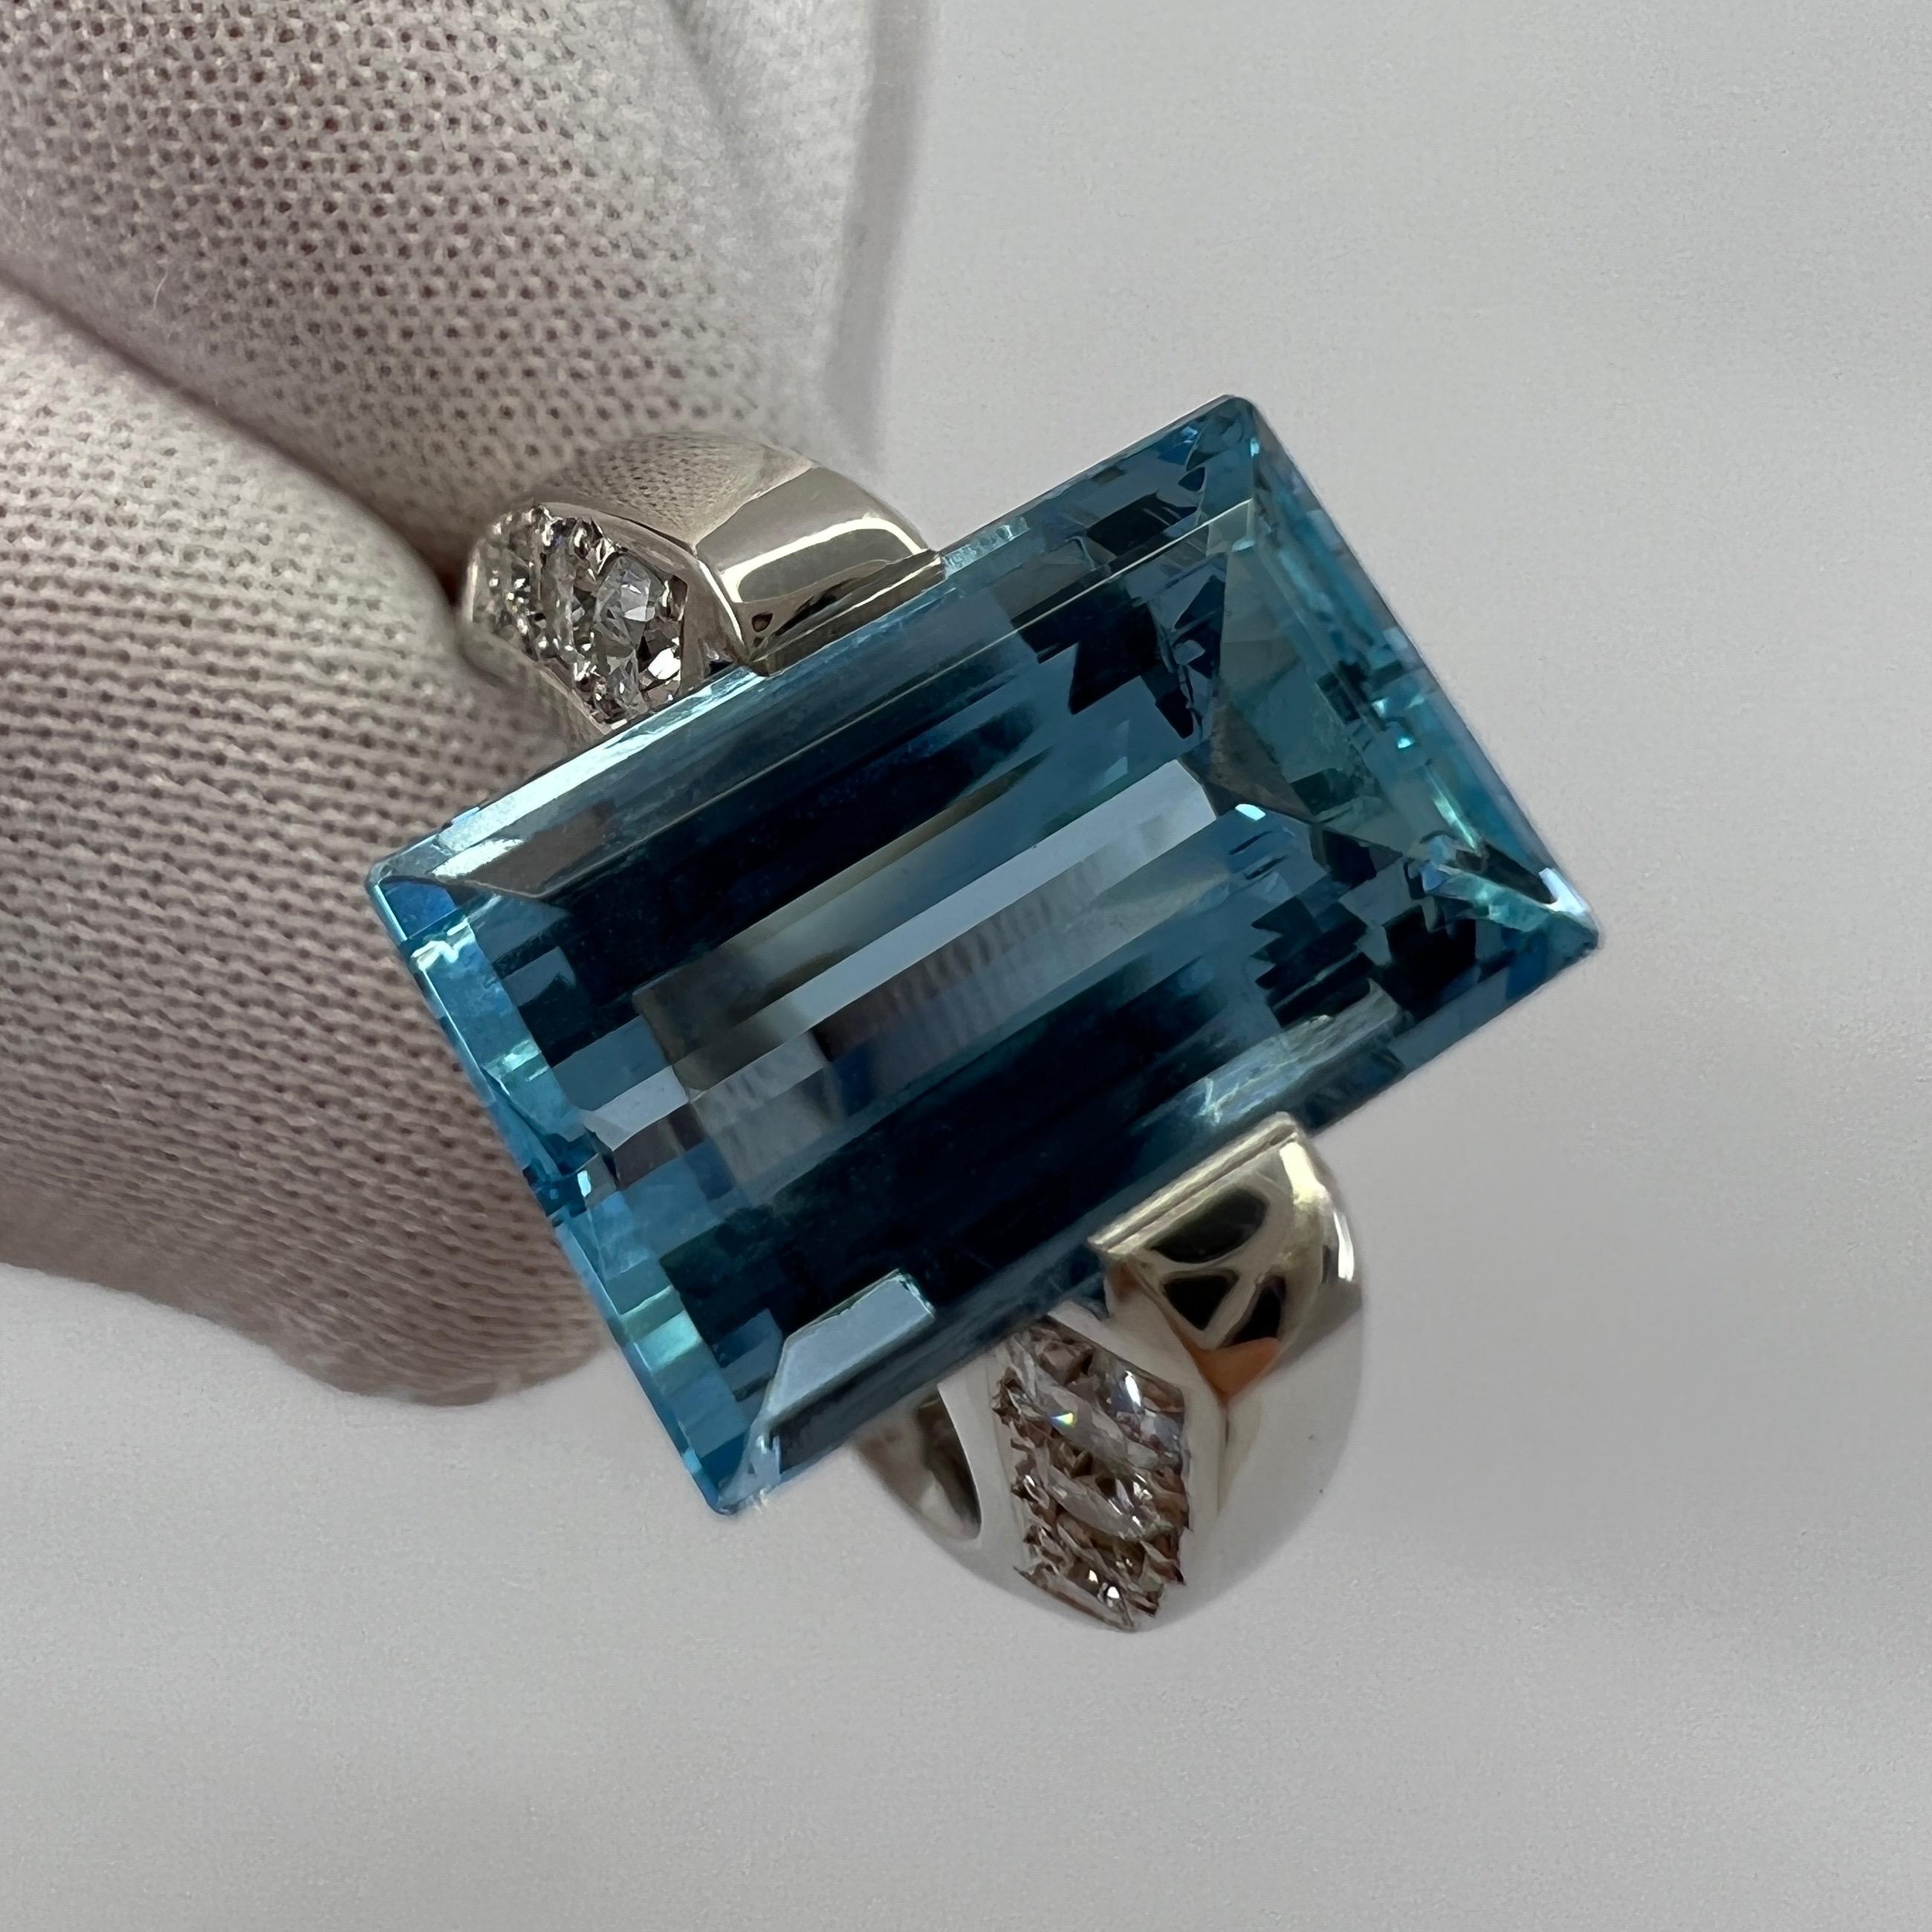 Fine Santa Maria Blue Aquamarine And Diamond Platinum Ring. 6.03tcw

Stunning platinum ring with a large 5.53 carat fine intense blue Santa Maria aquamarine. A fine colour stone with excellent colour, clarity and a superb emerald cut. A top grade